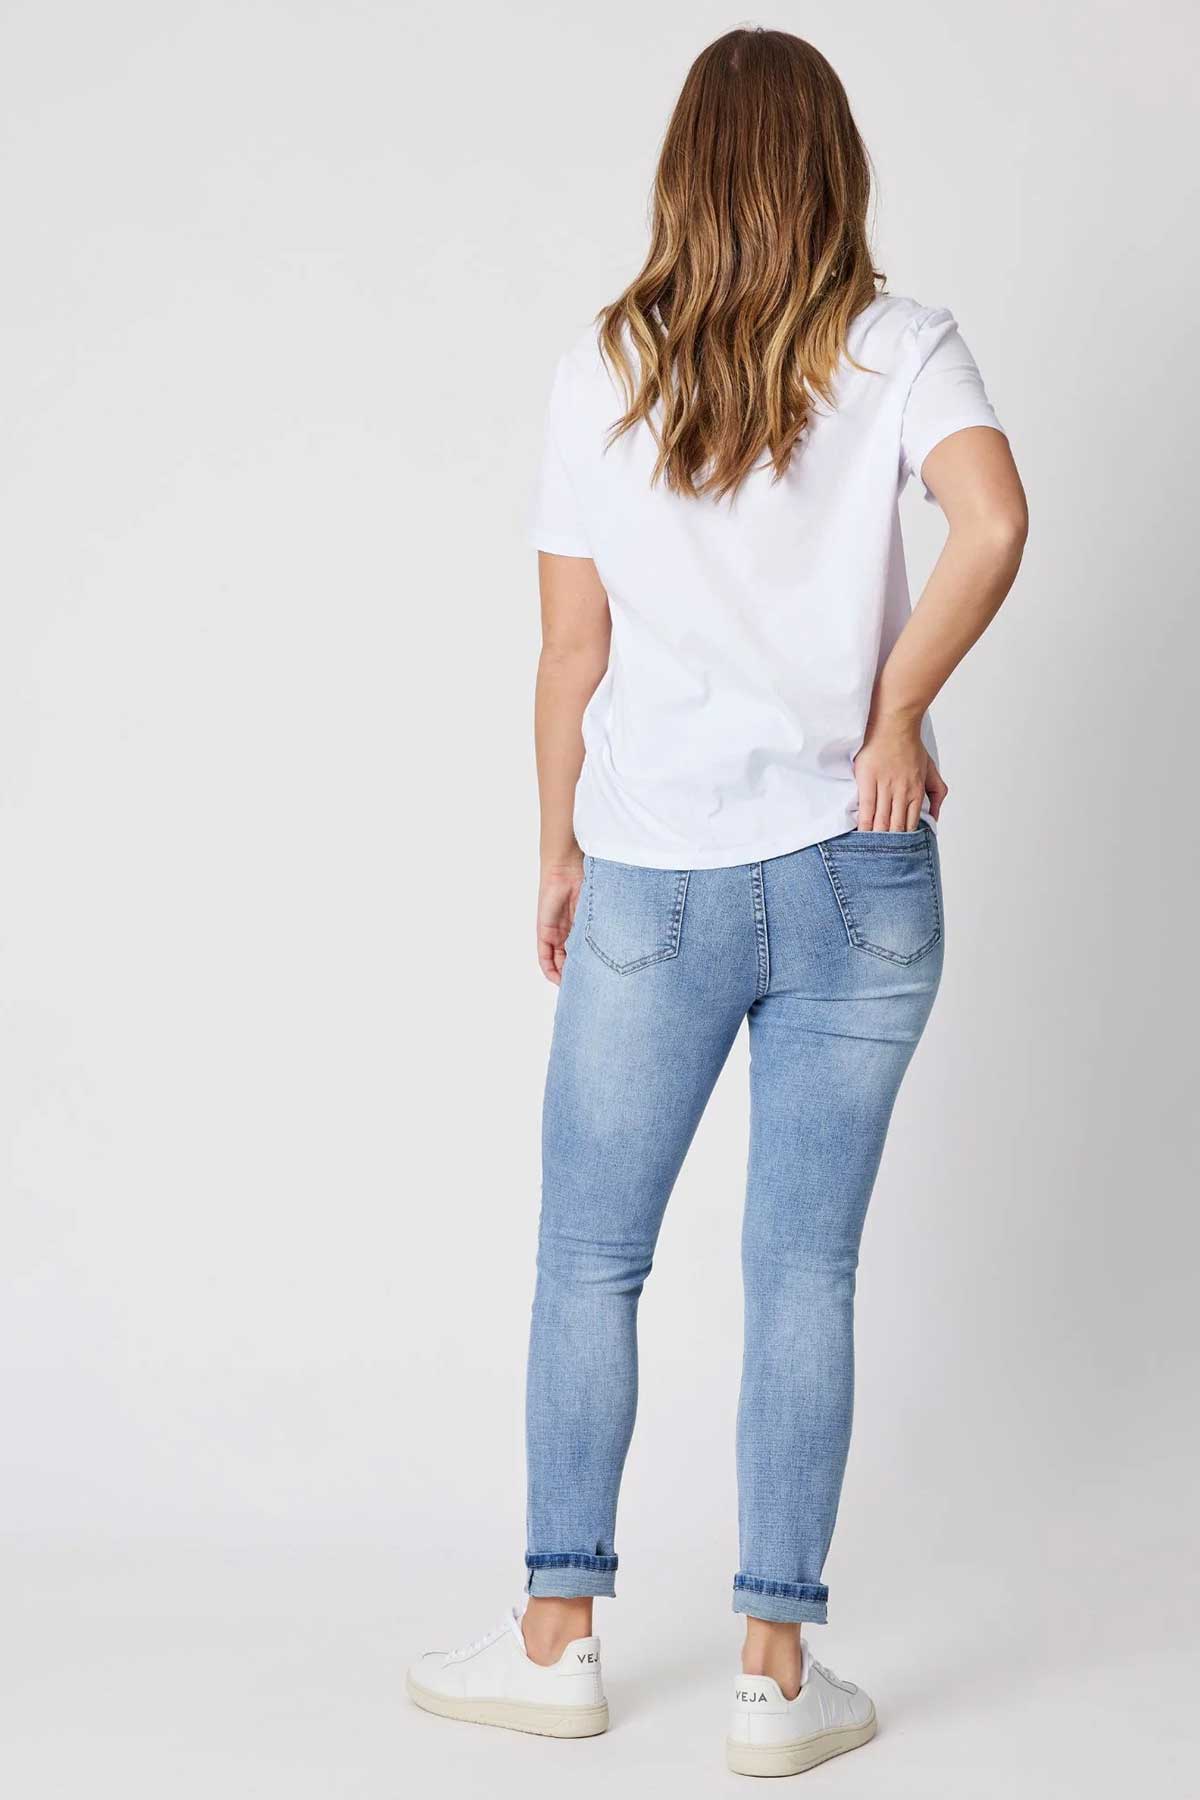 Woman wearing Threadz cotton jogger pant in denim and white tee back view